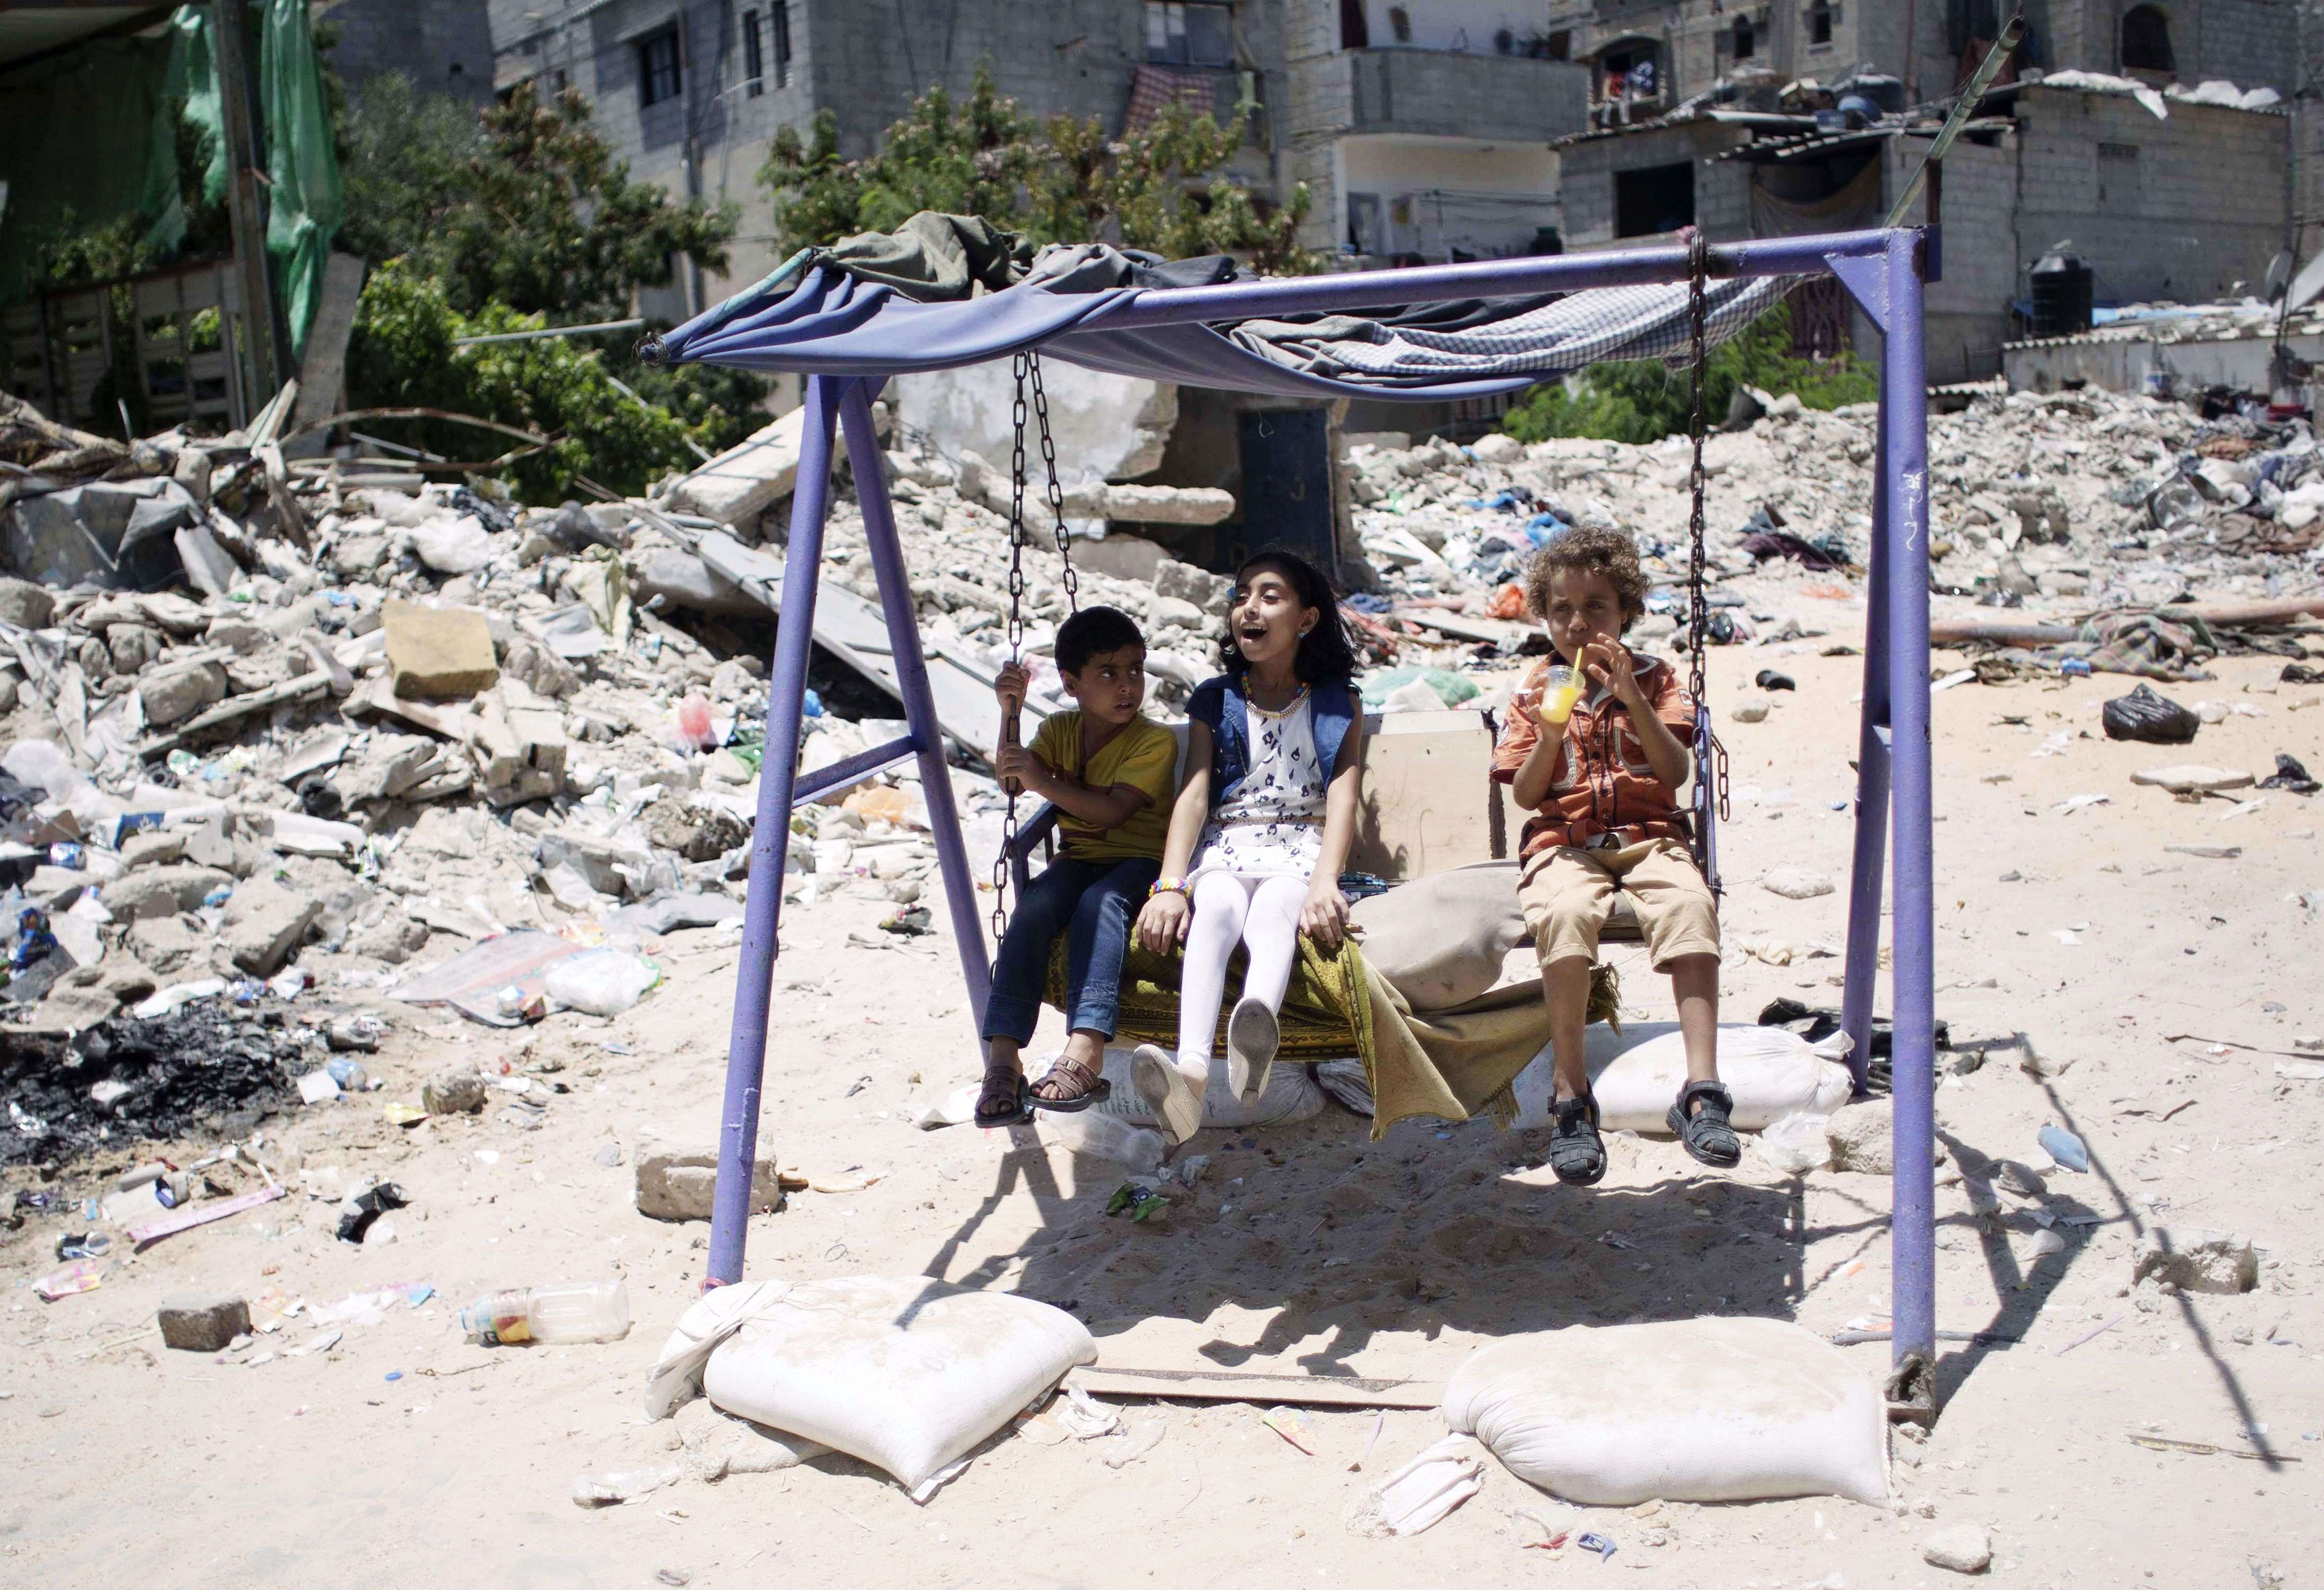 Palestinian children play on a swing near the rubble of buildings, reportedly destroyed during the 50-day war between Israel and Hamas militants in the summer of 2014, in the southern Gaza Strip town of Rafah, on the second day of Eid al-Fitr holiday which marks the end of the Muslim holy month of Ramadan. (AFP/ Said Khatib)